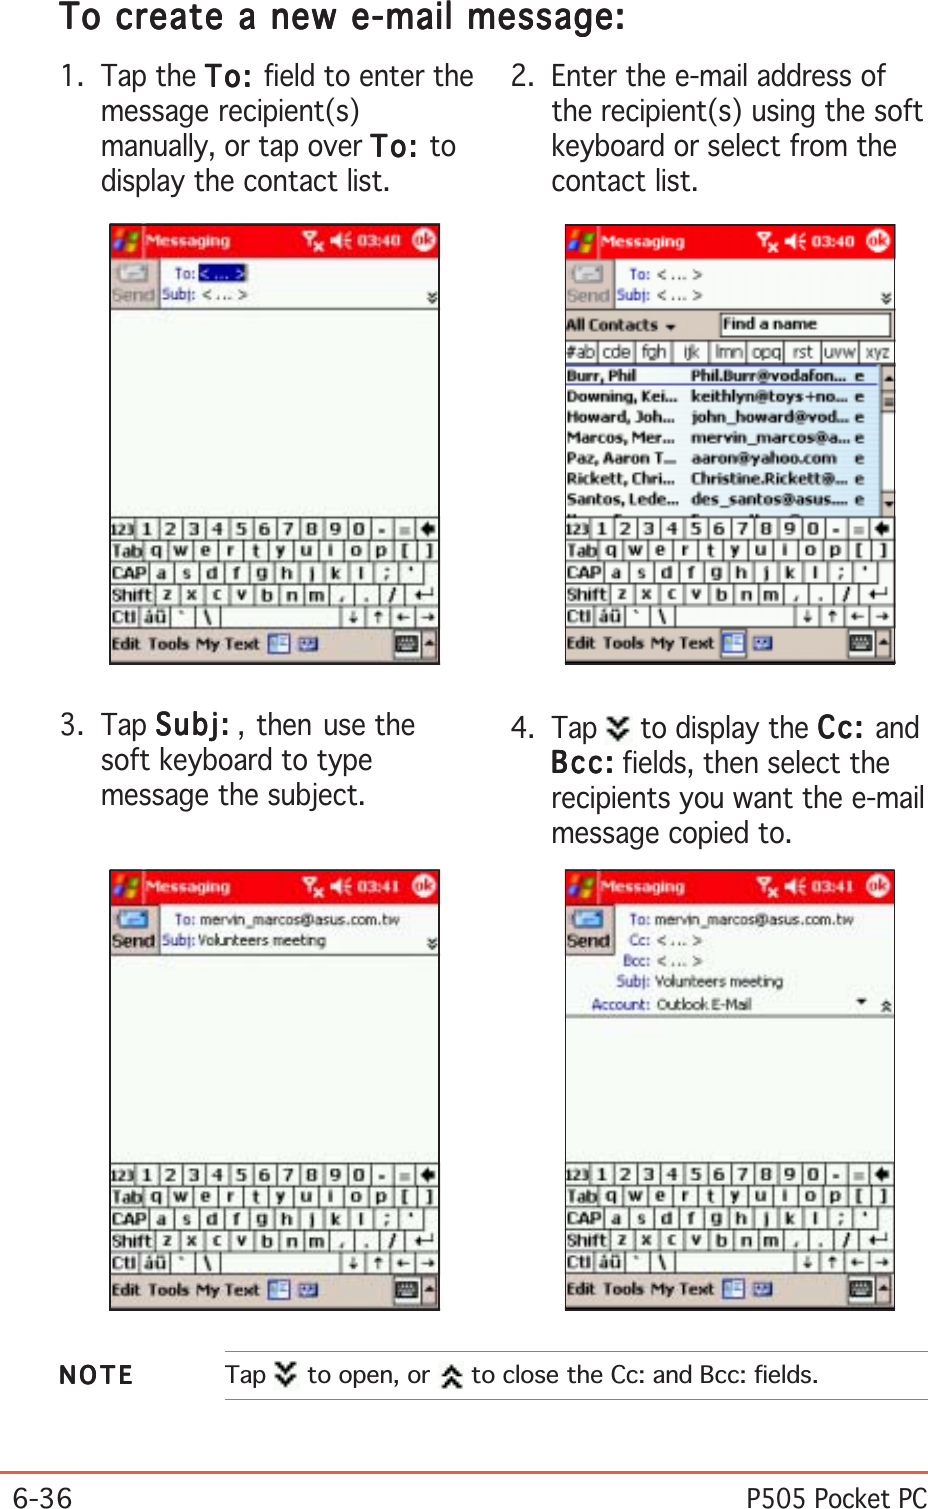 6-36P505 Pocket PC4. Tap   to display the Cc:Cc:Cc:Cc:Cc: andBcc:Bcc:Bcc:Bcc:Bc c : fields, then select therecipients you want the e-mailmessage copied to.1. Tap the To:To:To:To:To : field to enter themessage recipient(s)manually, or tap over To:To:To:To:To: todisplay the contact list.2. Enter the e-mail address ofthe recipient(s) using the softkeyboard or select from thecontact list.3. Tap Subj:Subj:Subj:Subj:Su bj : , then use thesoft keyboard to typemessage the subject.NOTENOTENOTENOTENOTE Tap  to open, or   to close the Cc: and Bcc: fields.To create a new e-mail message:To create a new e-mail message:To create a new e-mail message:To create a new e-mail message:To create a new e-mail message: